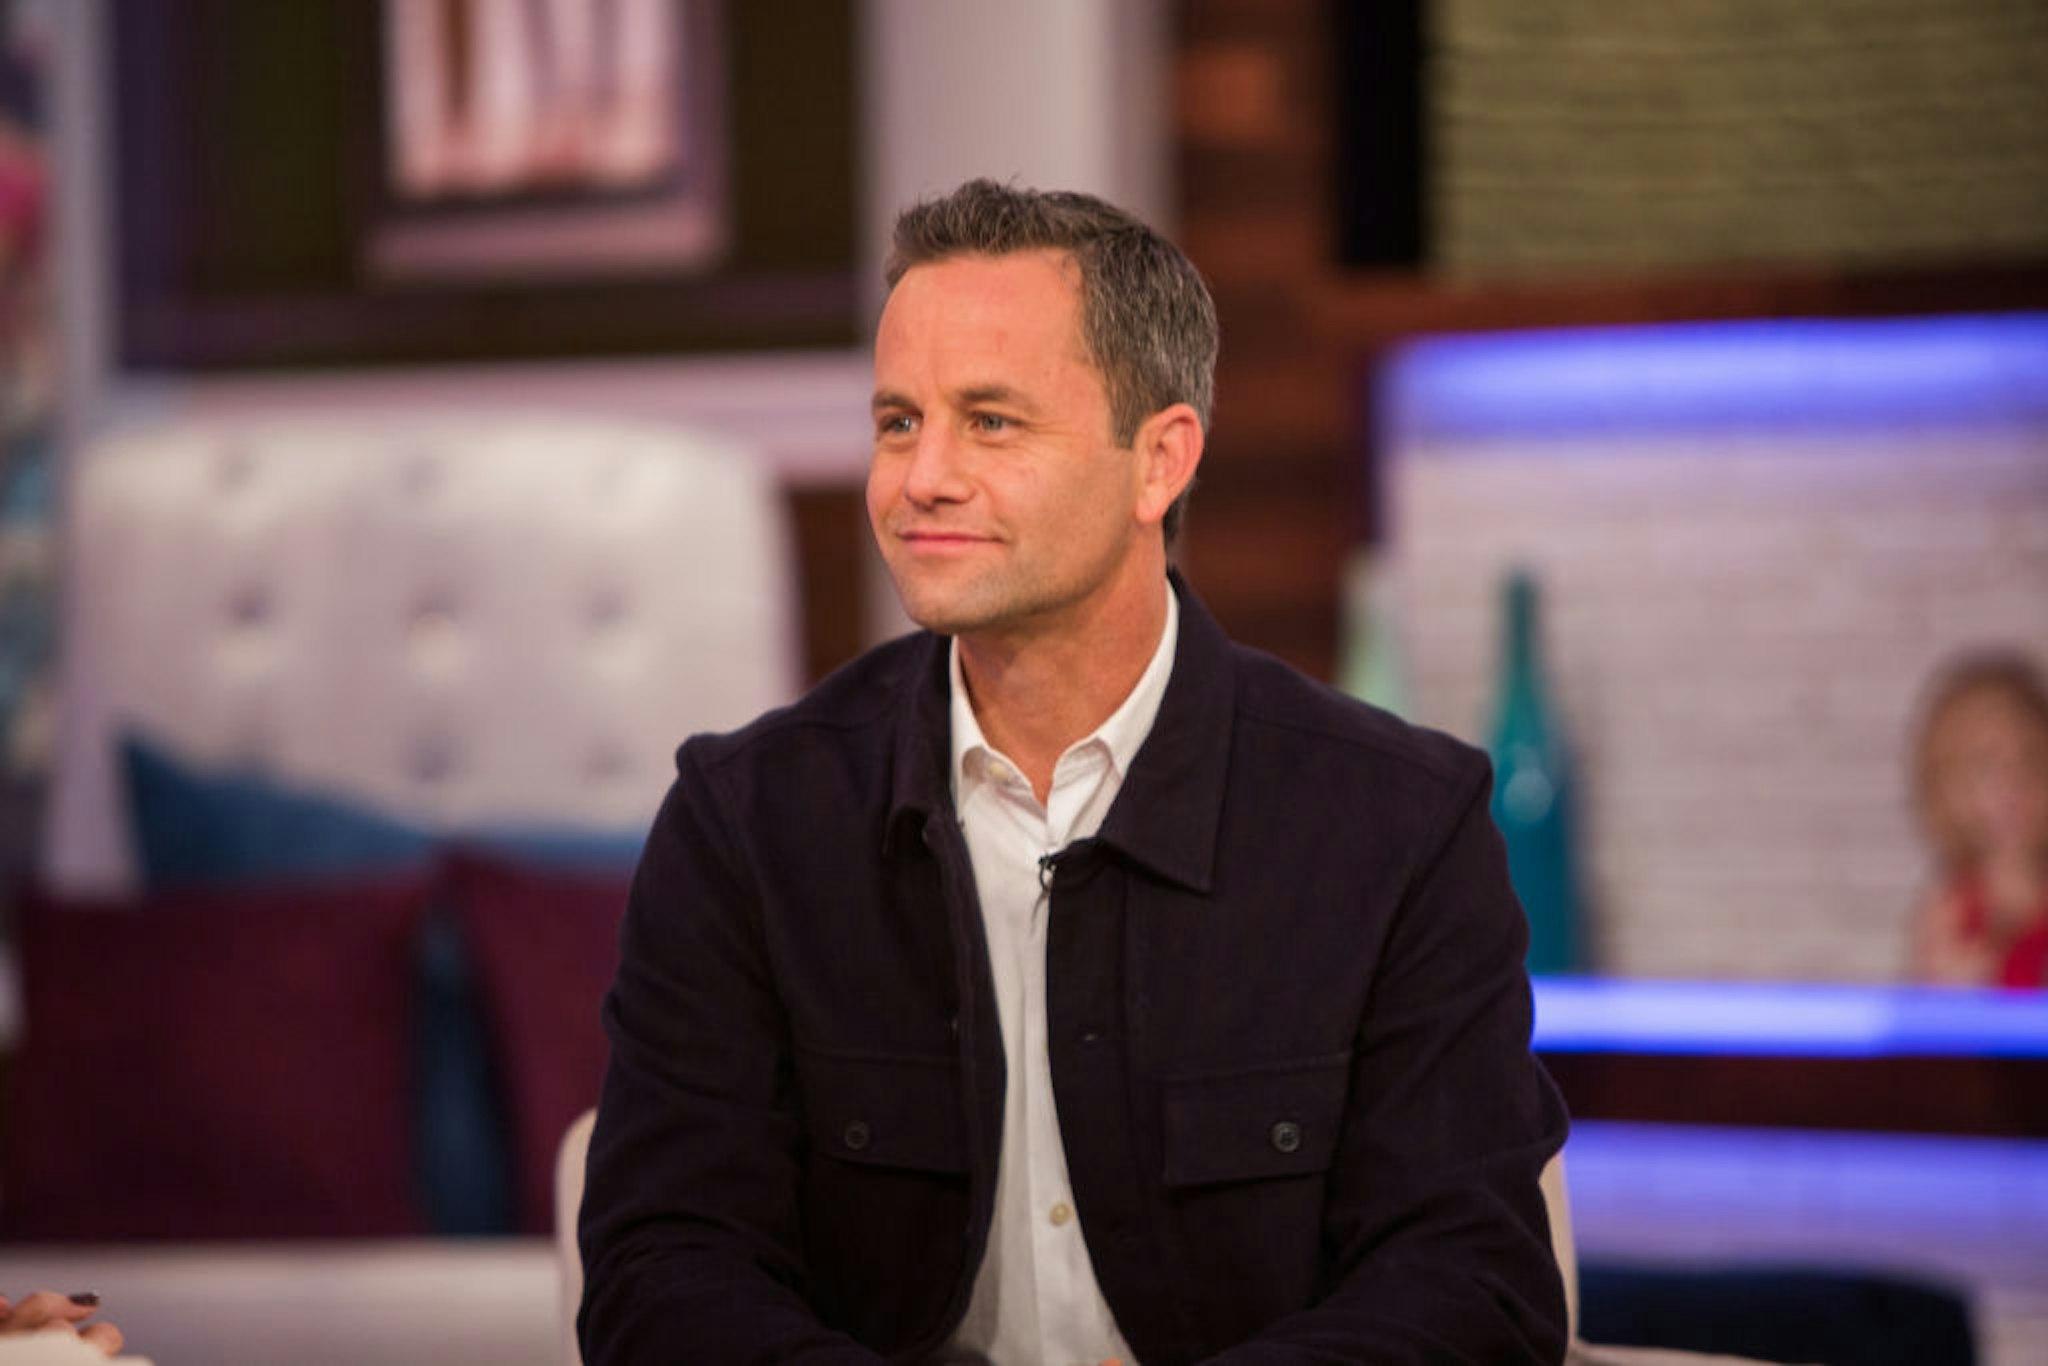 TODAY -- Pictured: Kirk Cameron on Friday, Feb. 22, 2018 -- (Photo by: Nathan Congleton/NBCU Photo Bank/NBCUniversal via Getty Images via Getty Images)